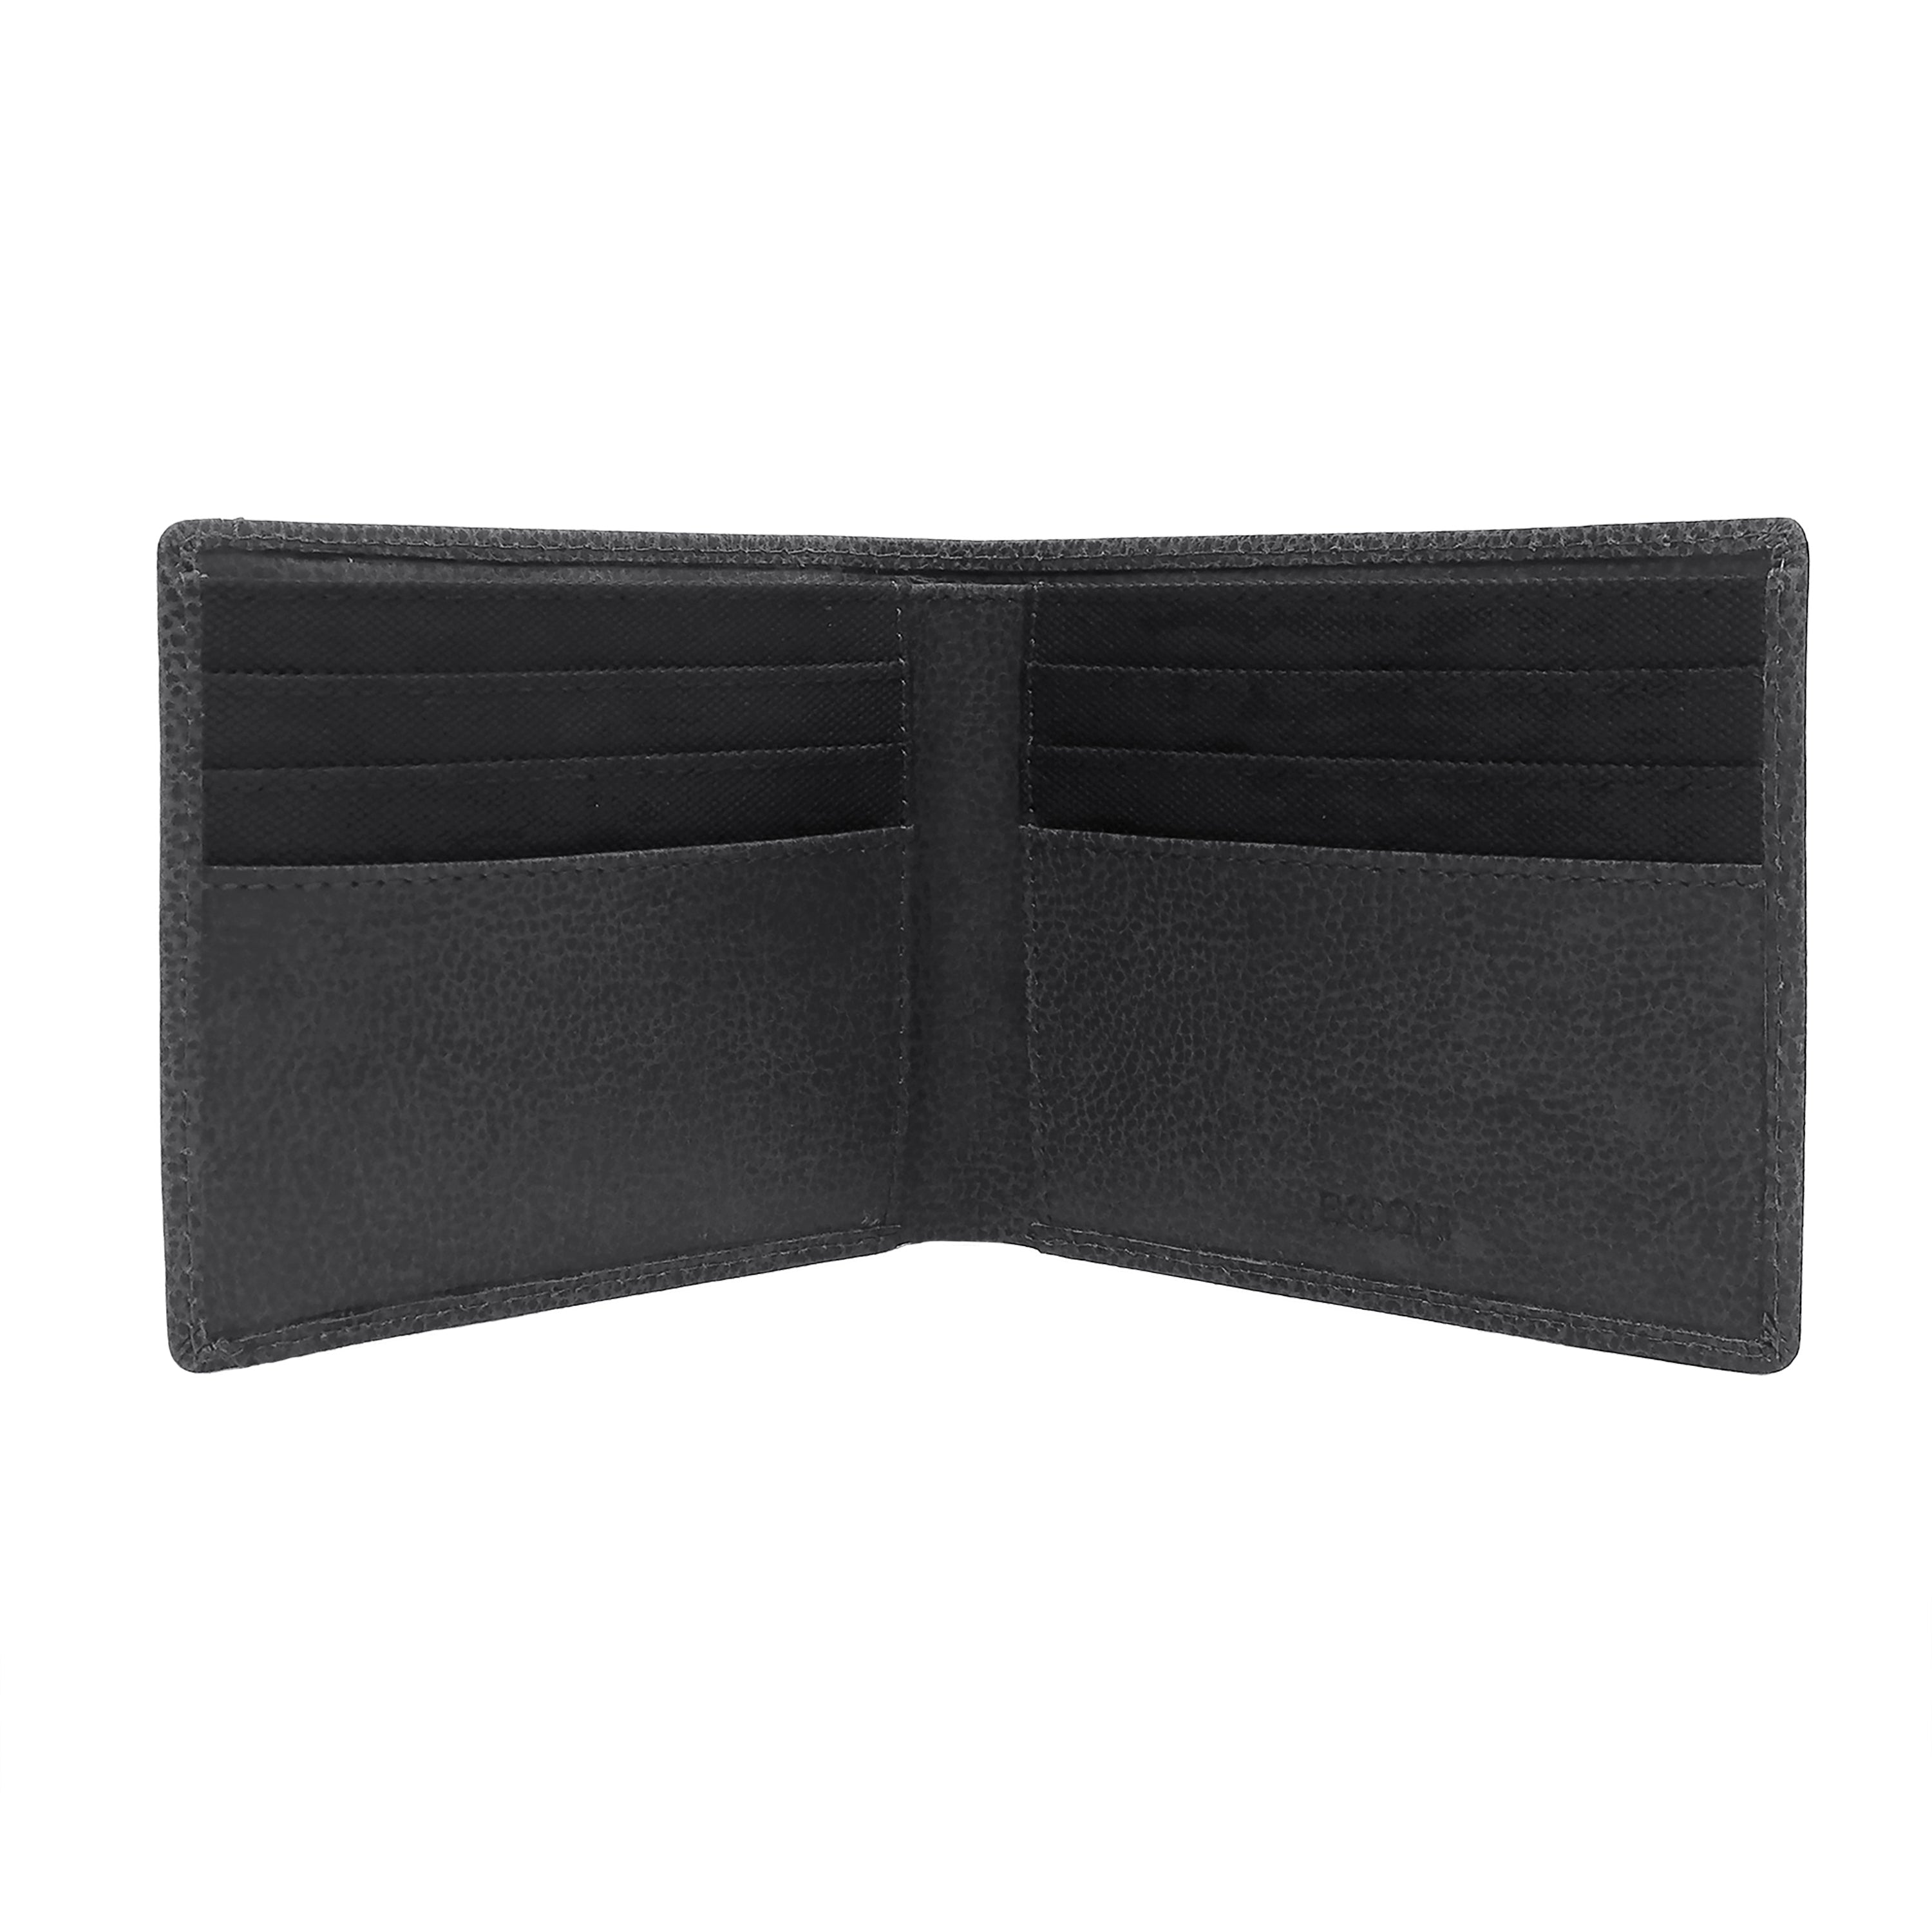 black interior view 3 in 1 leather wallet bifold